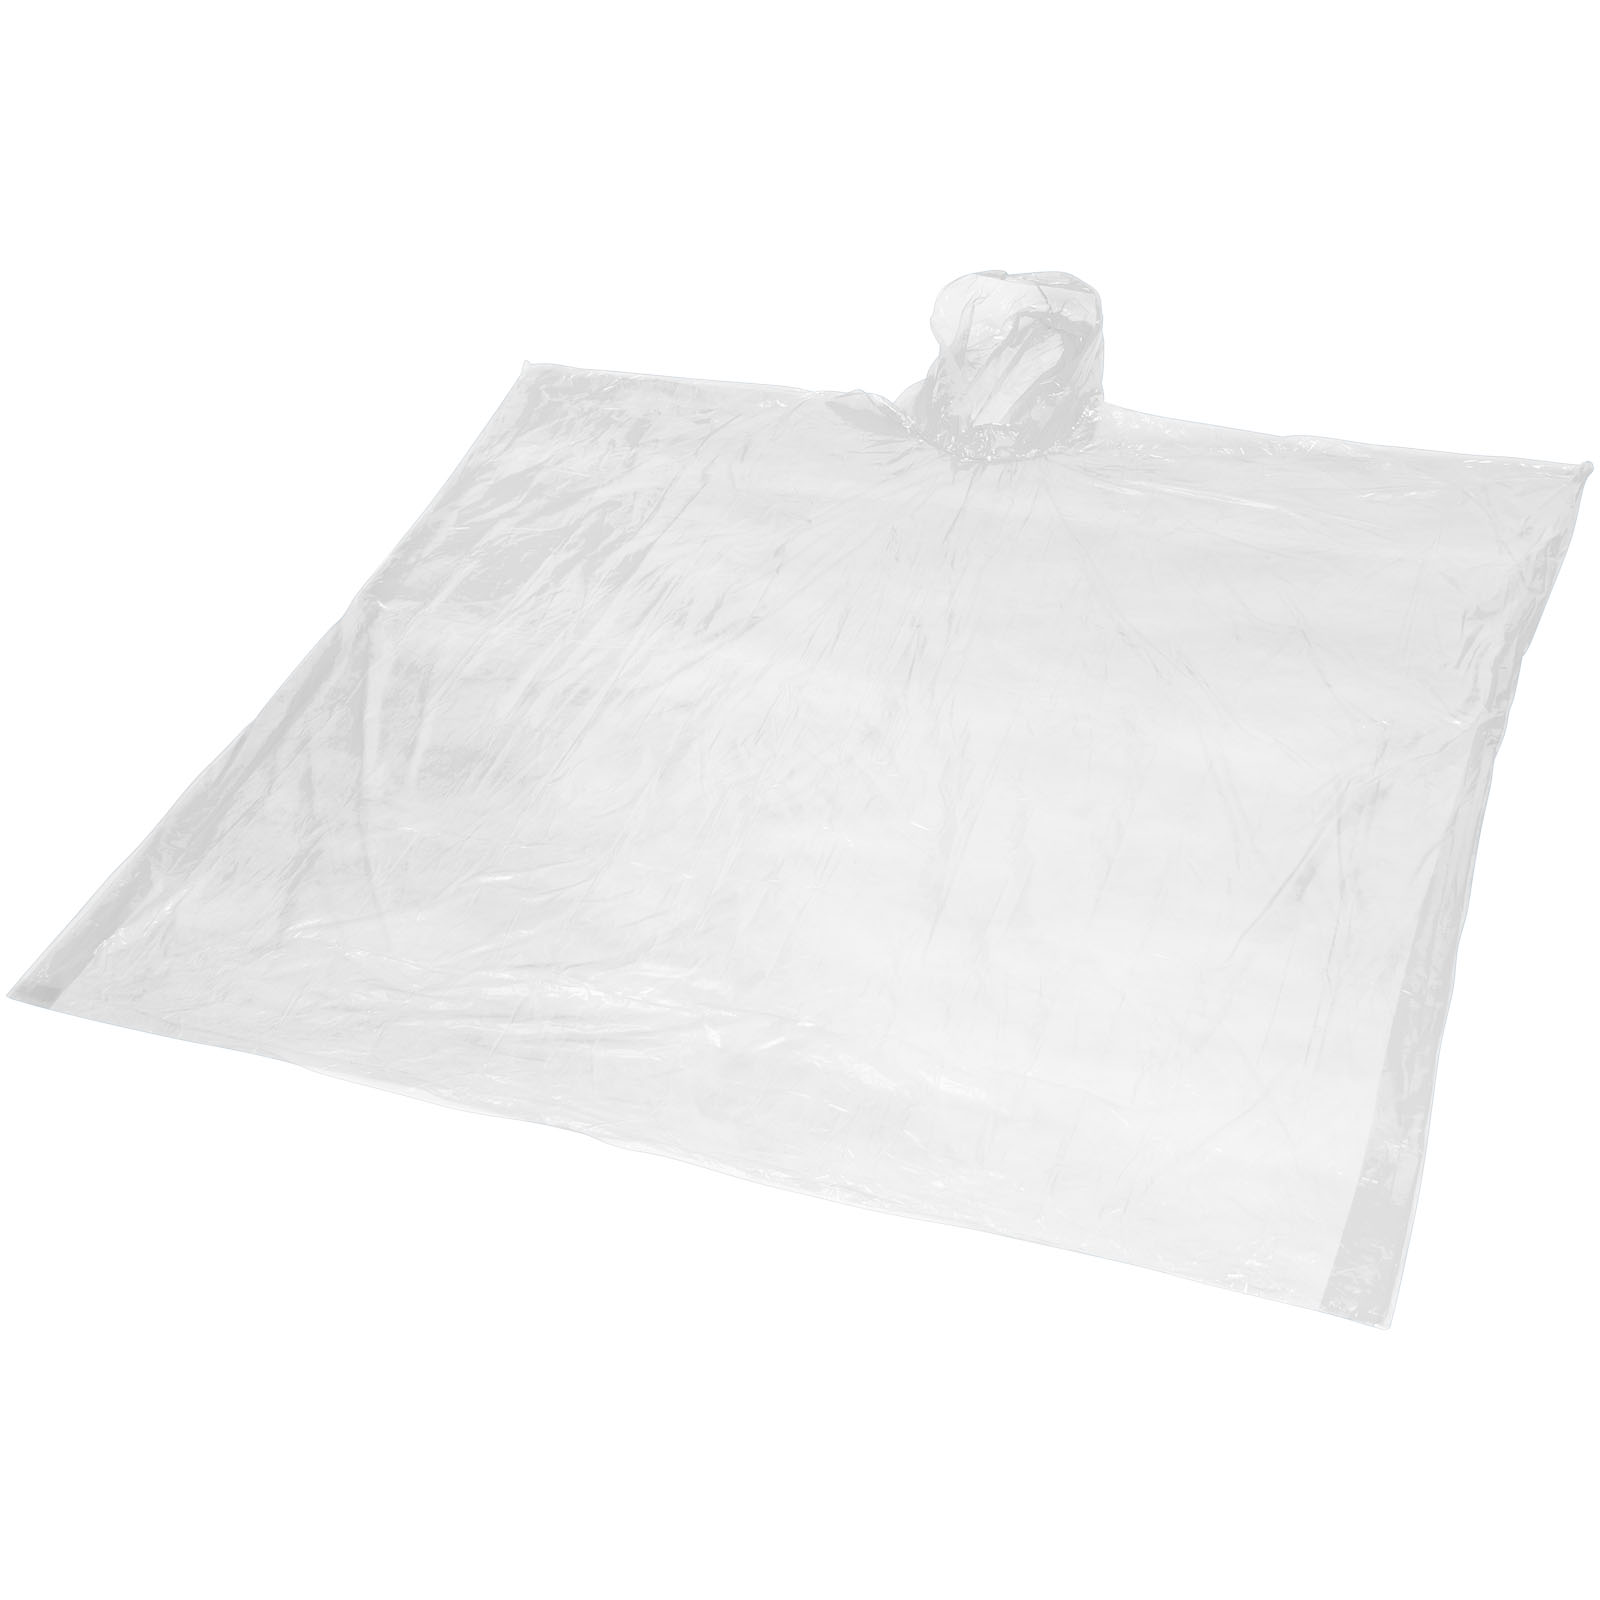 Advertising Rain Ponchos - Mayan recycled plastic disposable rain poncho with storage pouch